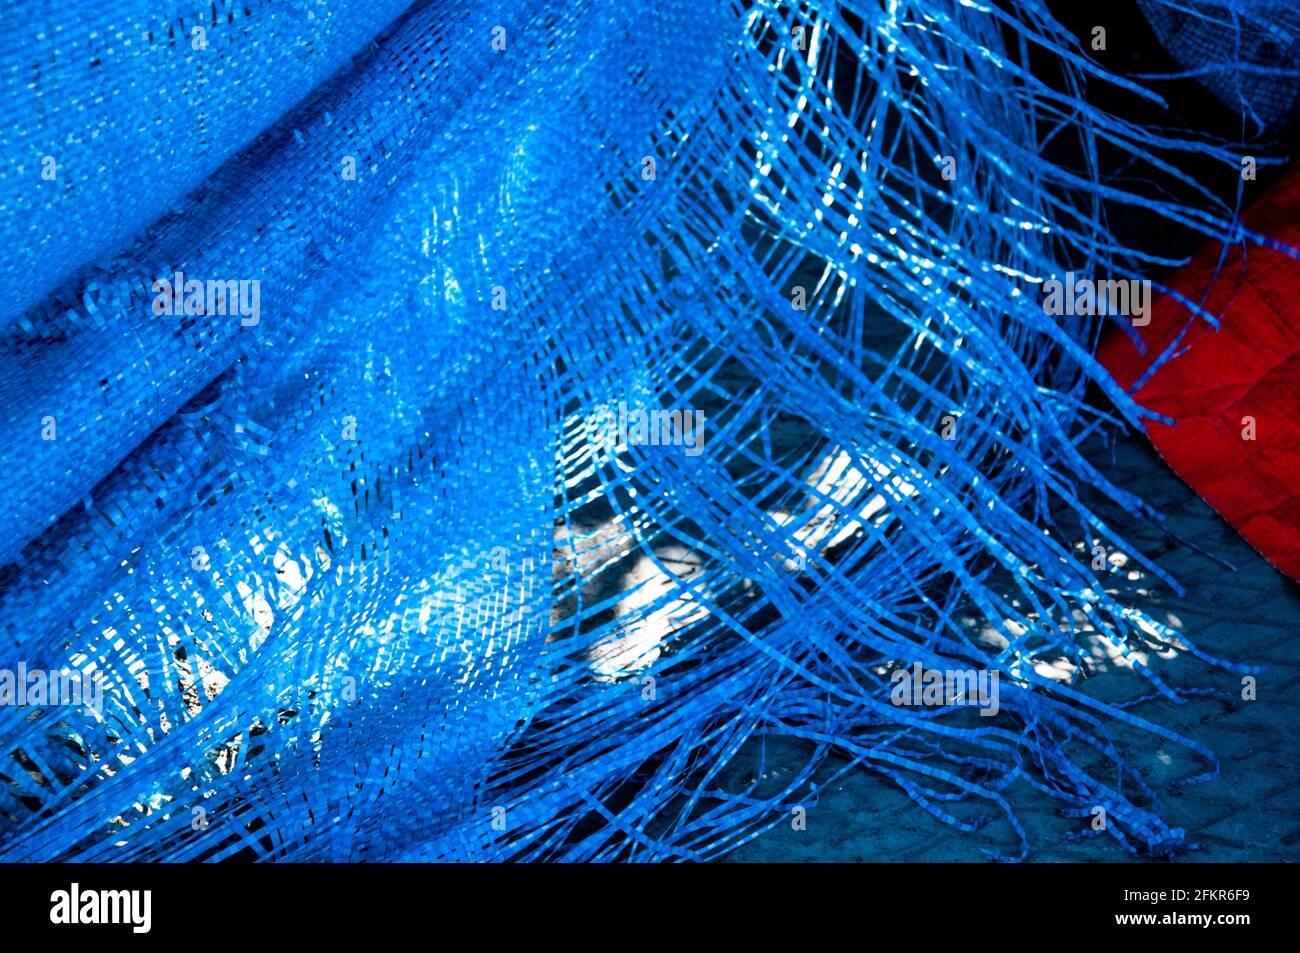 Bright blue color plastic industrial fabric with textured ragged edges. Torn wrap with long fringed fibers. Blue and red backdrop. Grunge texture. Ind Stock Photo